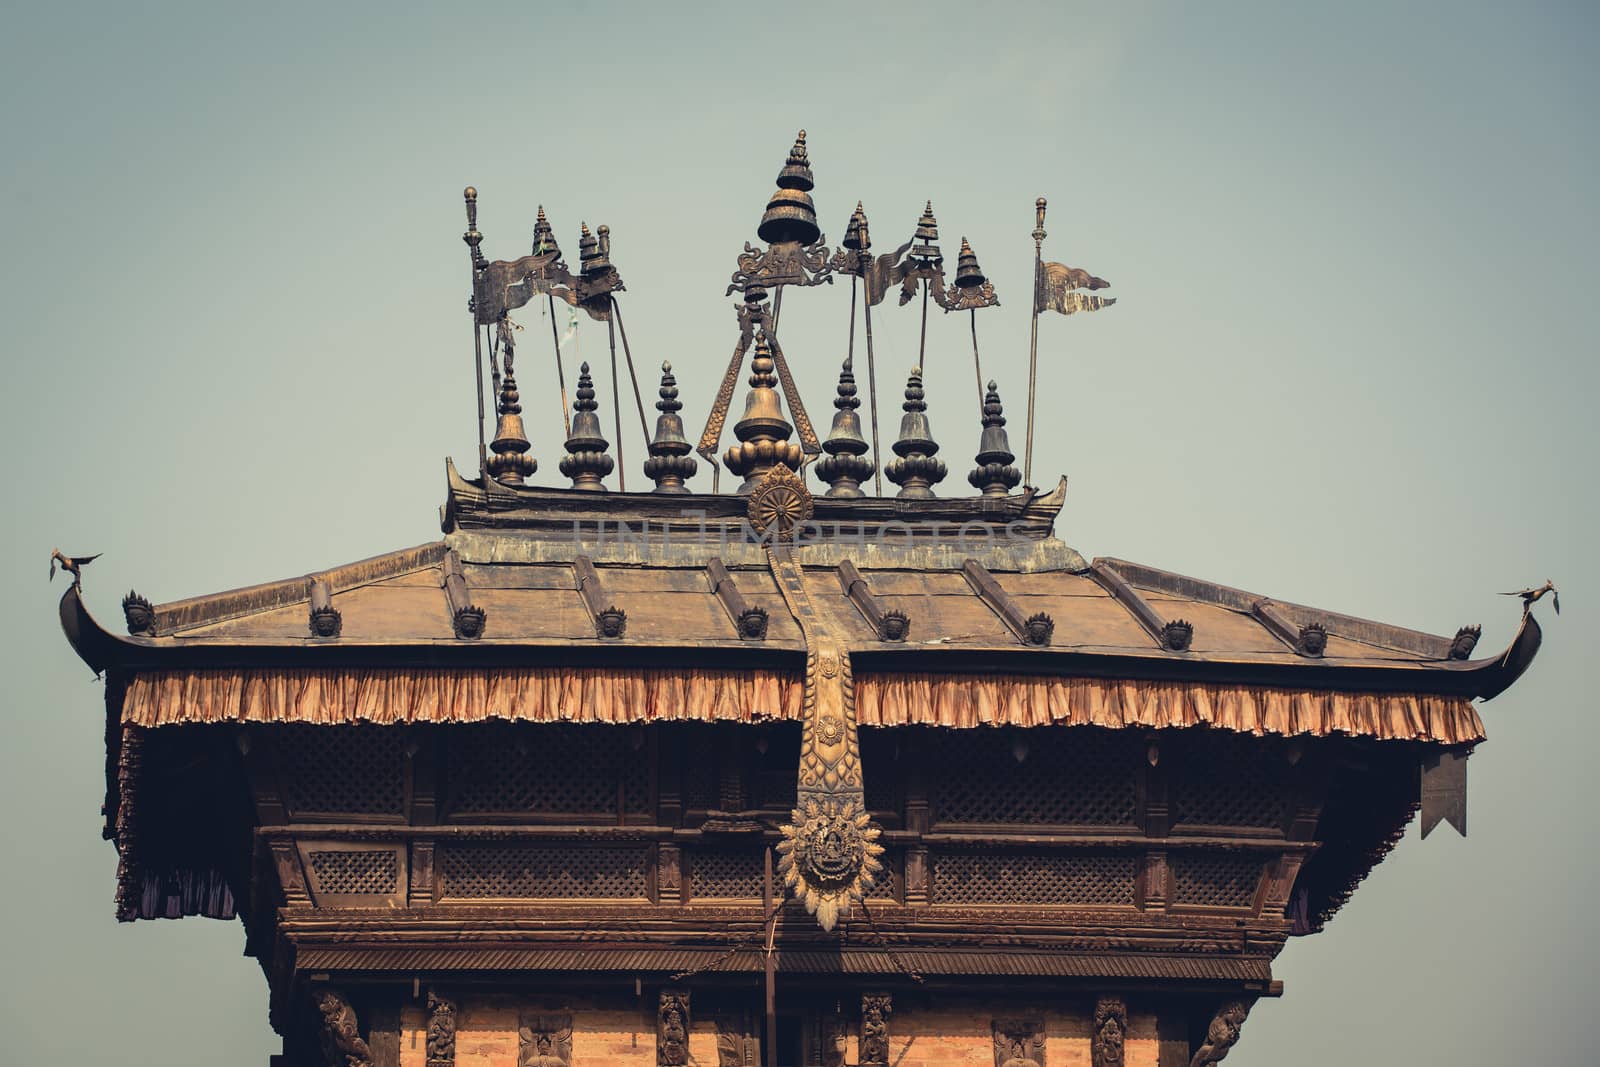 Roof of an temple, Bhaktapur by watchtheworld